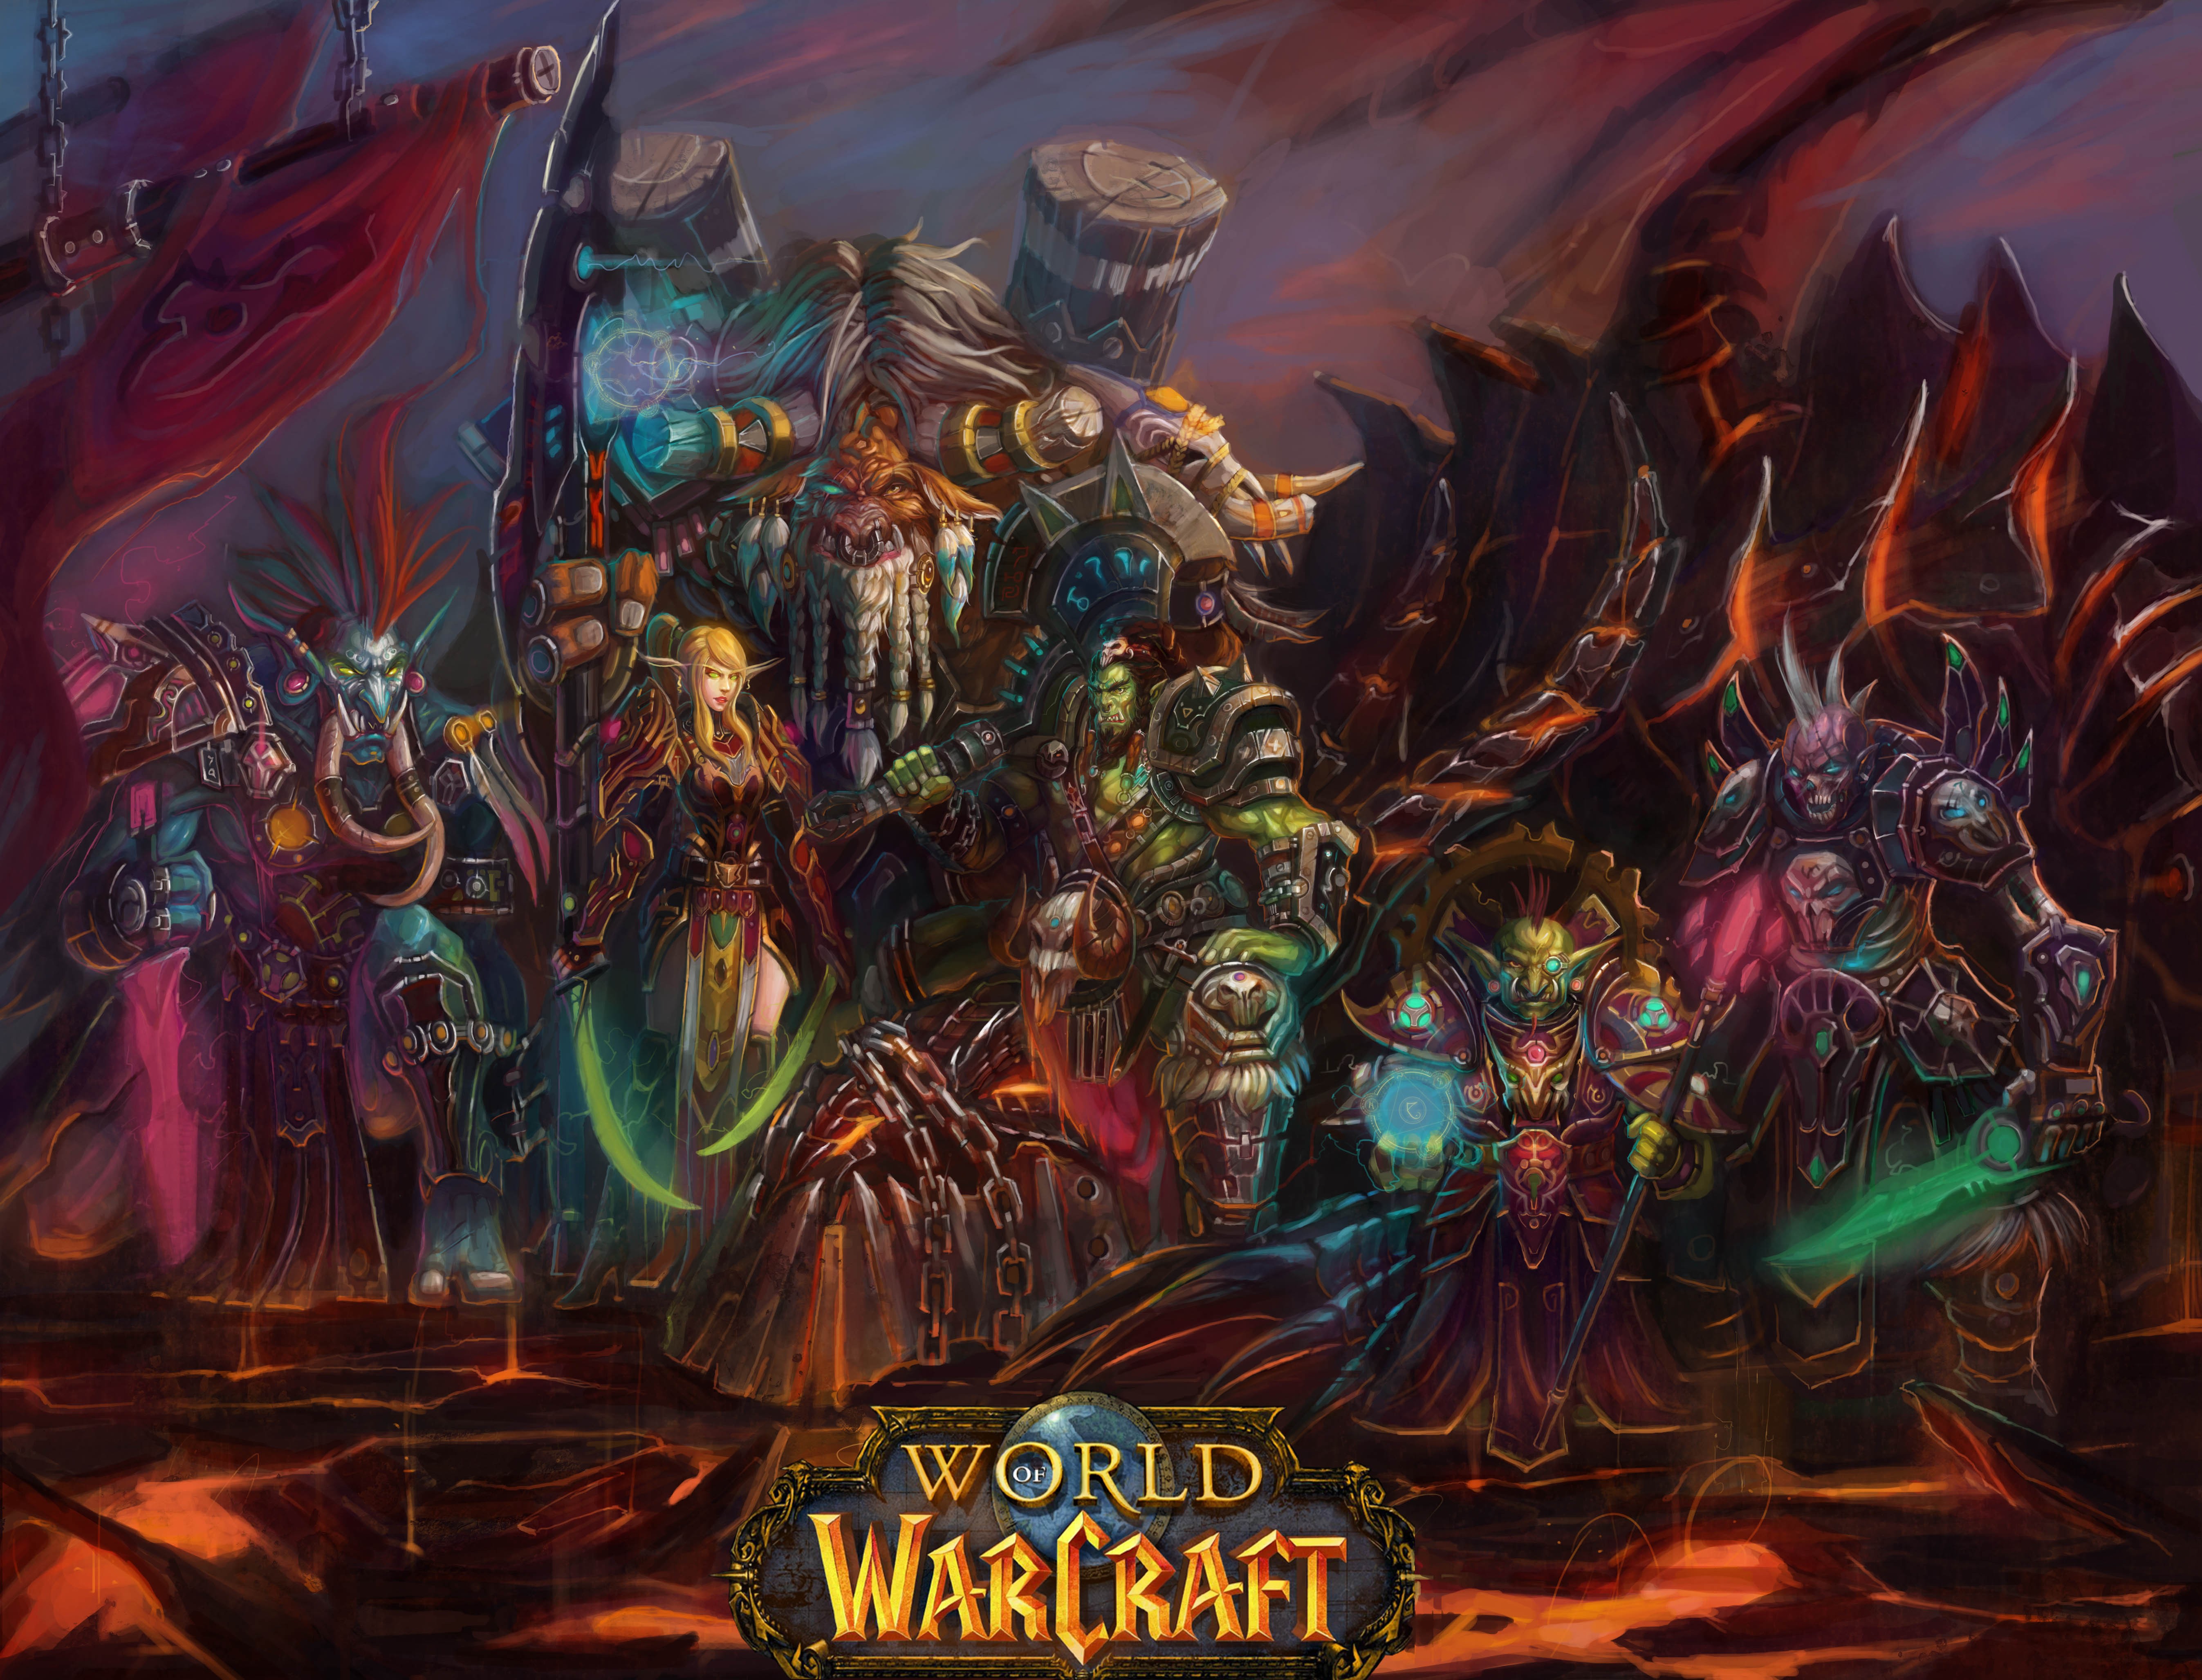 General 5386x4110 World of Warcraft video games PC gaming fantasy art video game art Blizzard Entertainment